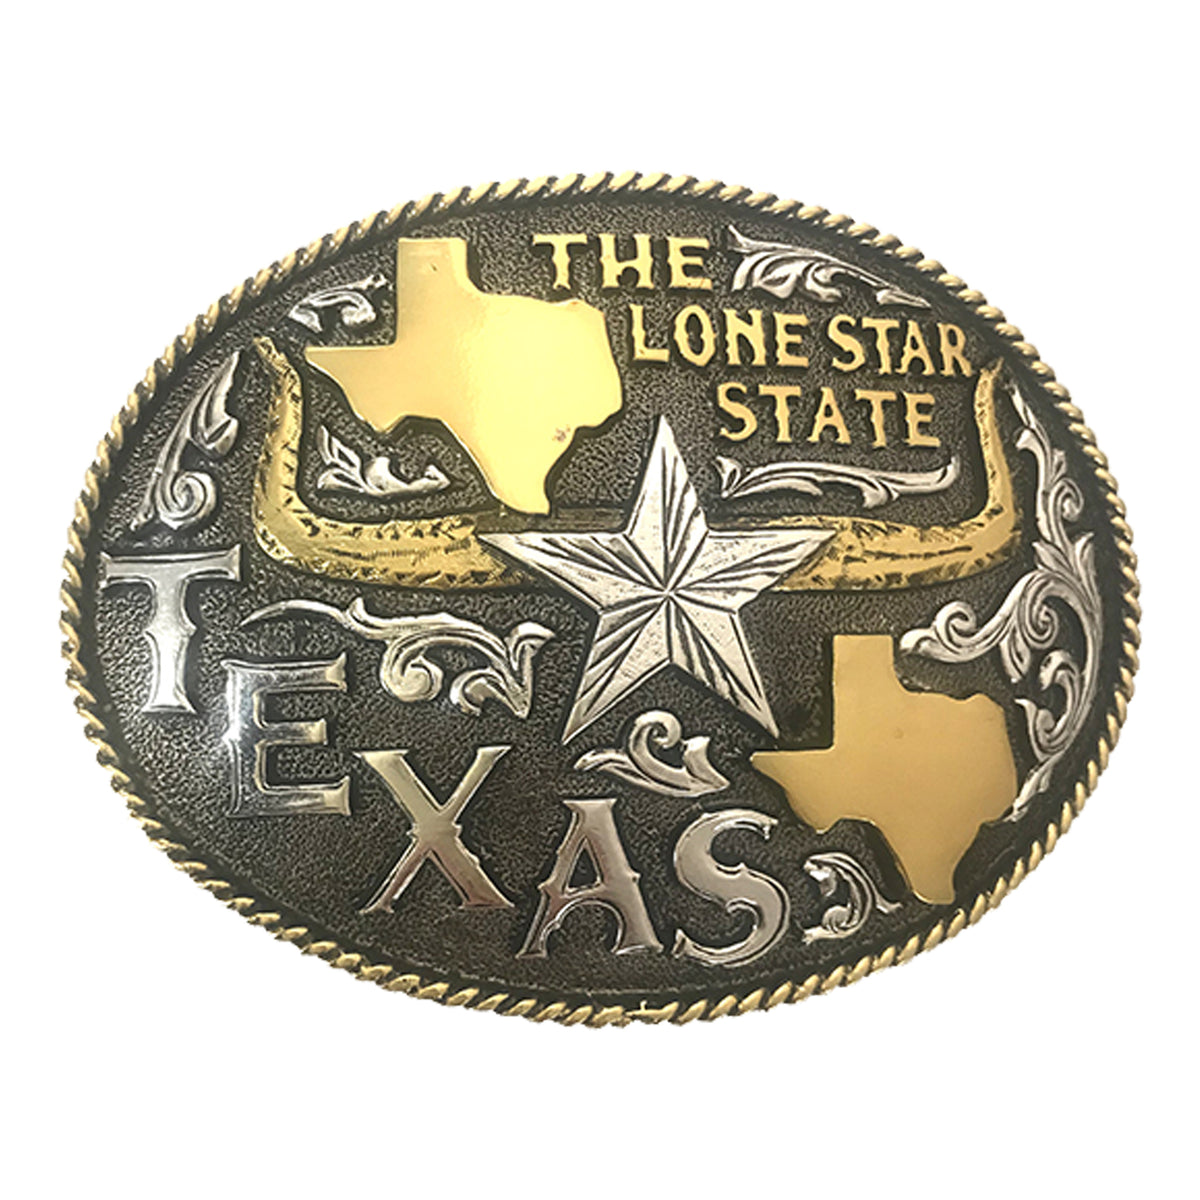 The Lone Star State Buckle